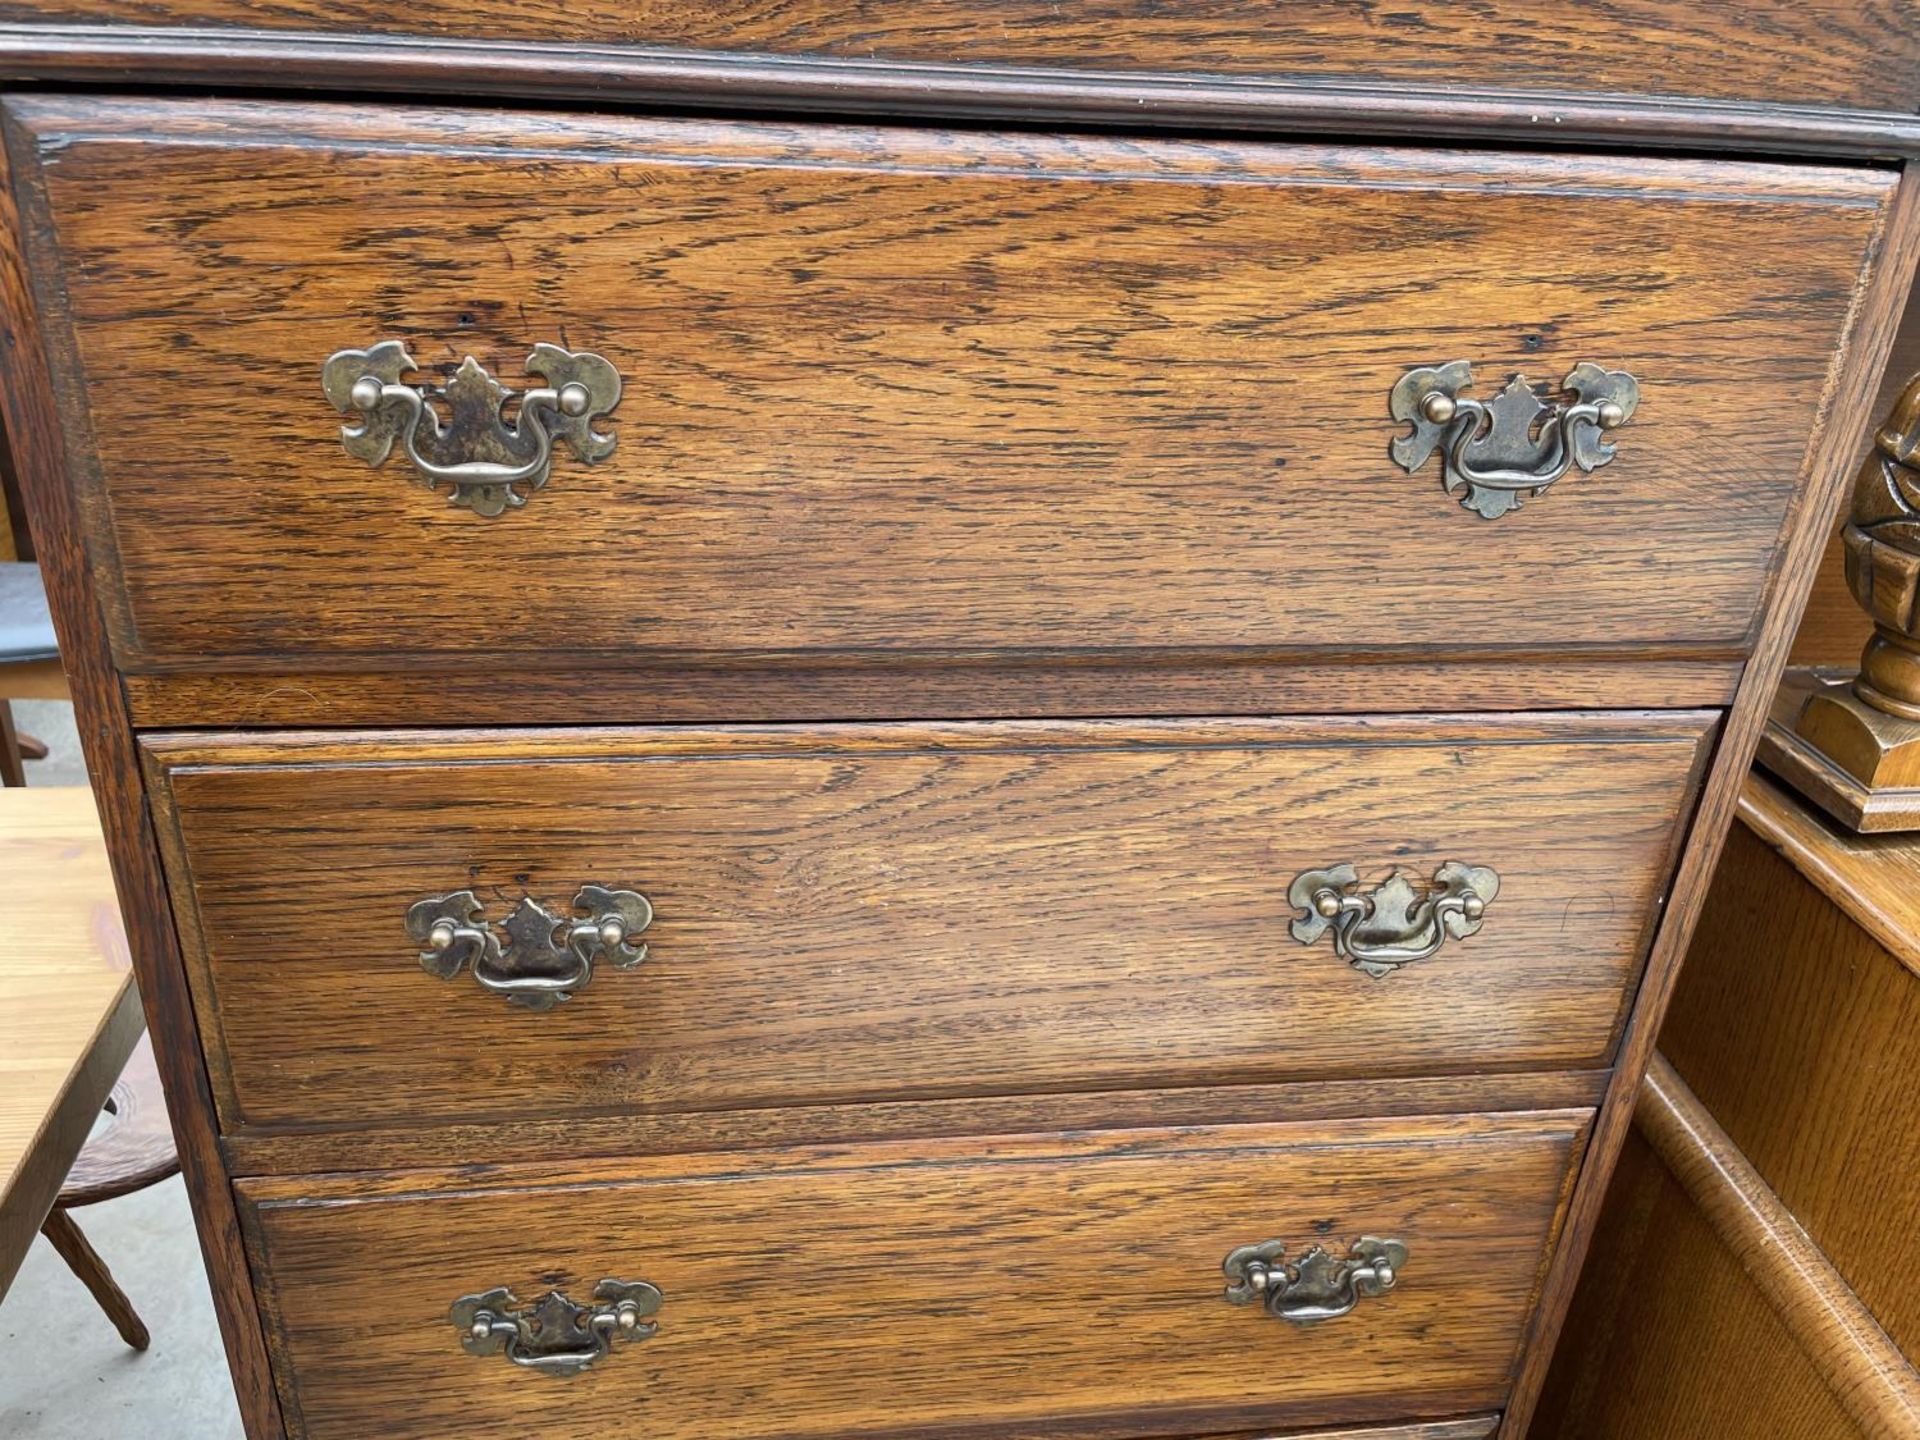 AN EARLY 20TH CENTURY NARROW OAK CHEST OF SIX DRAWERS ON BRACKET FEET, 24" WIDE - Image 2 of 4